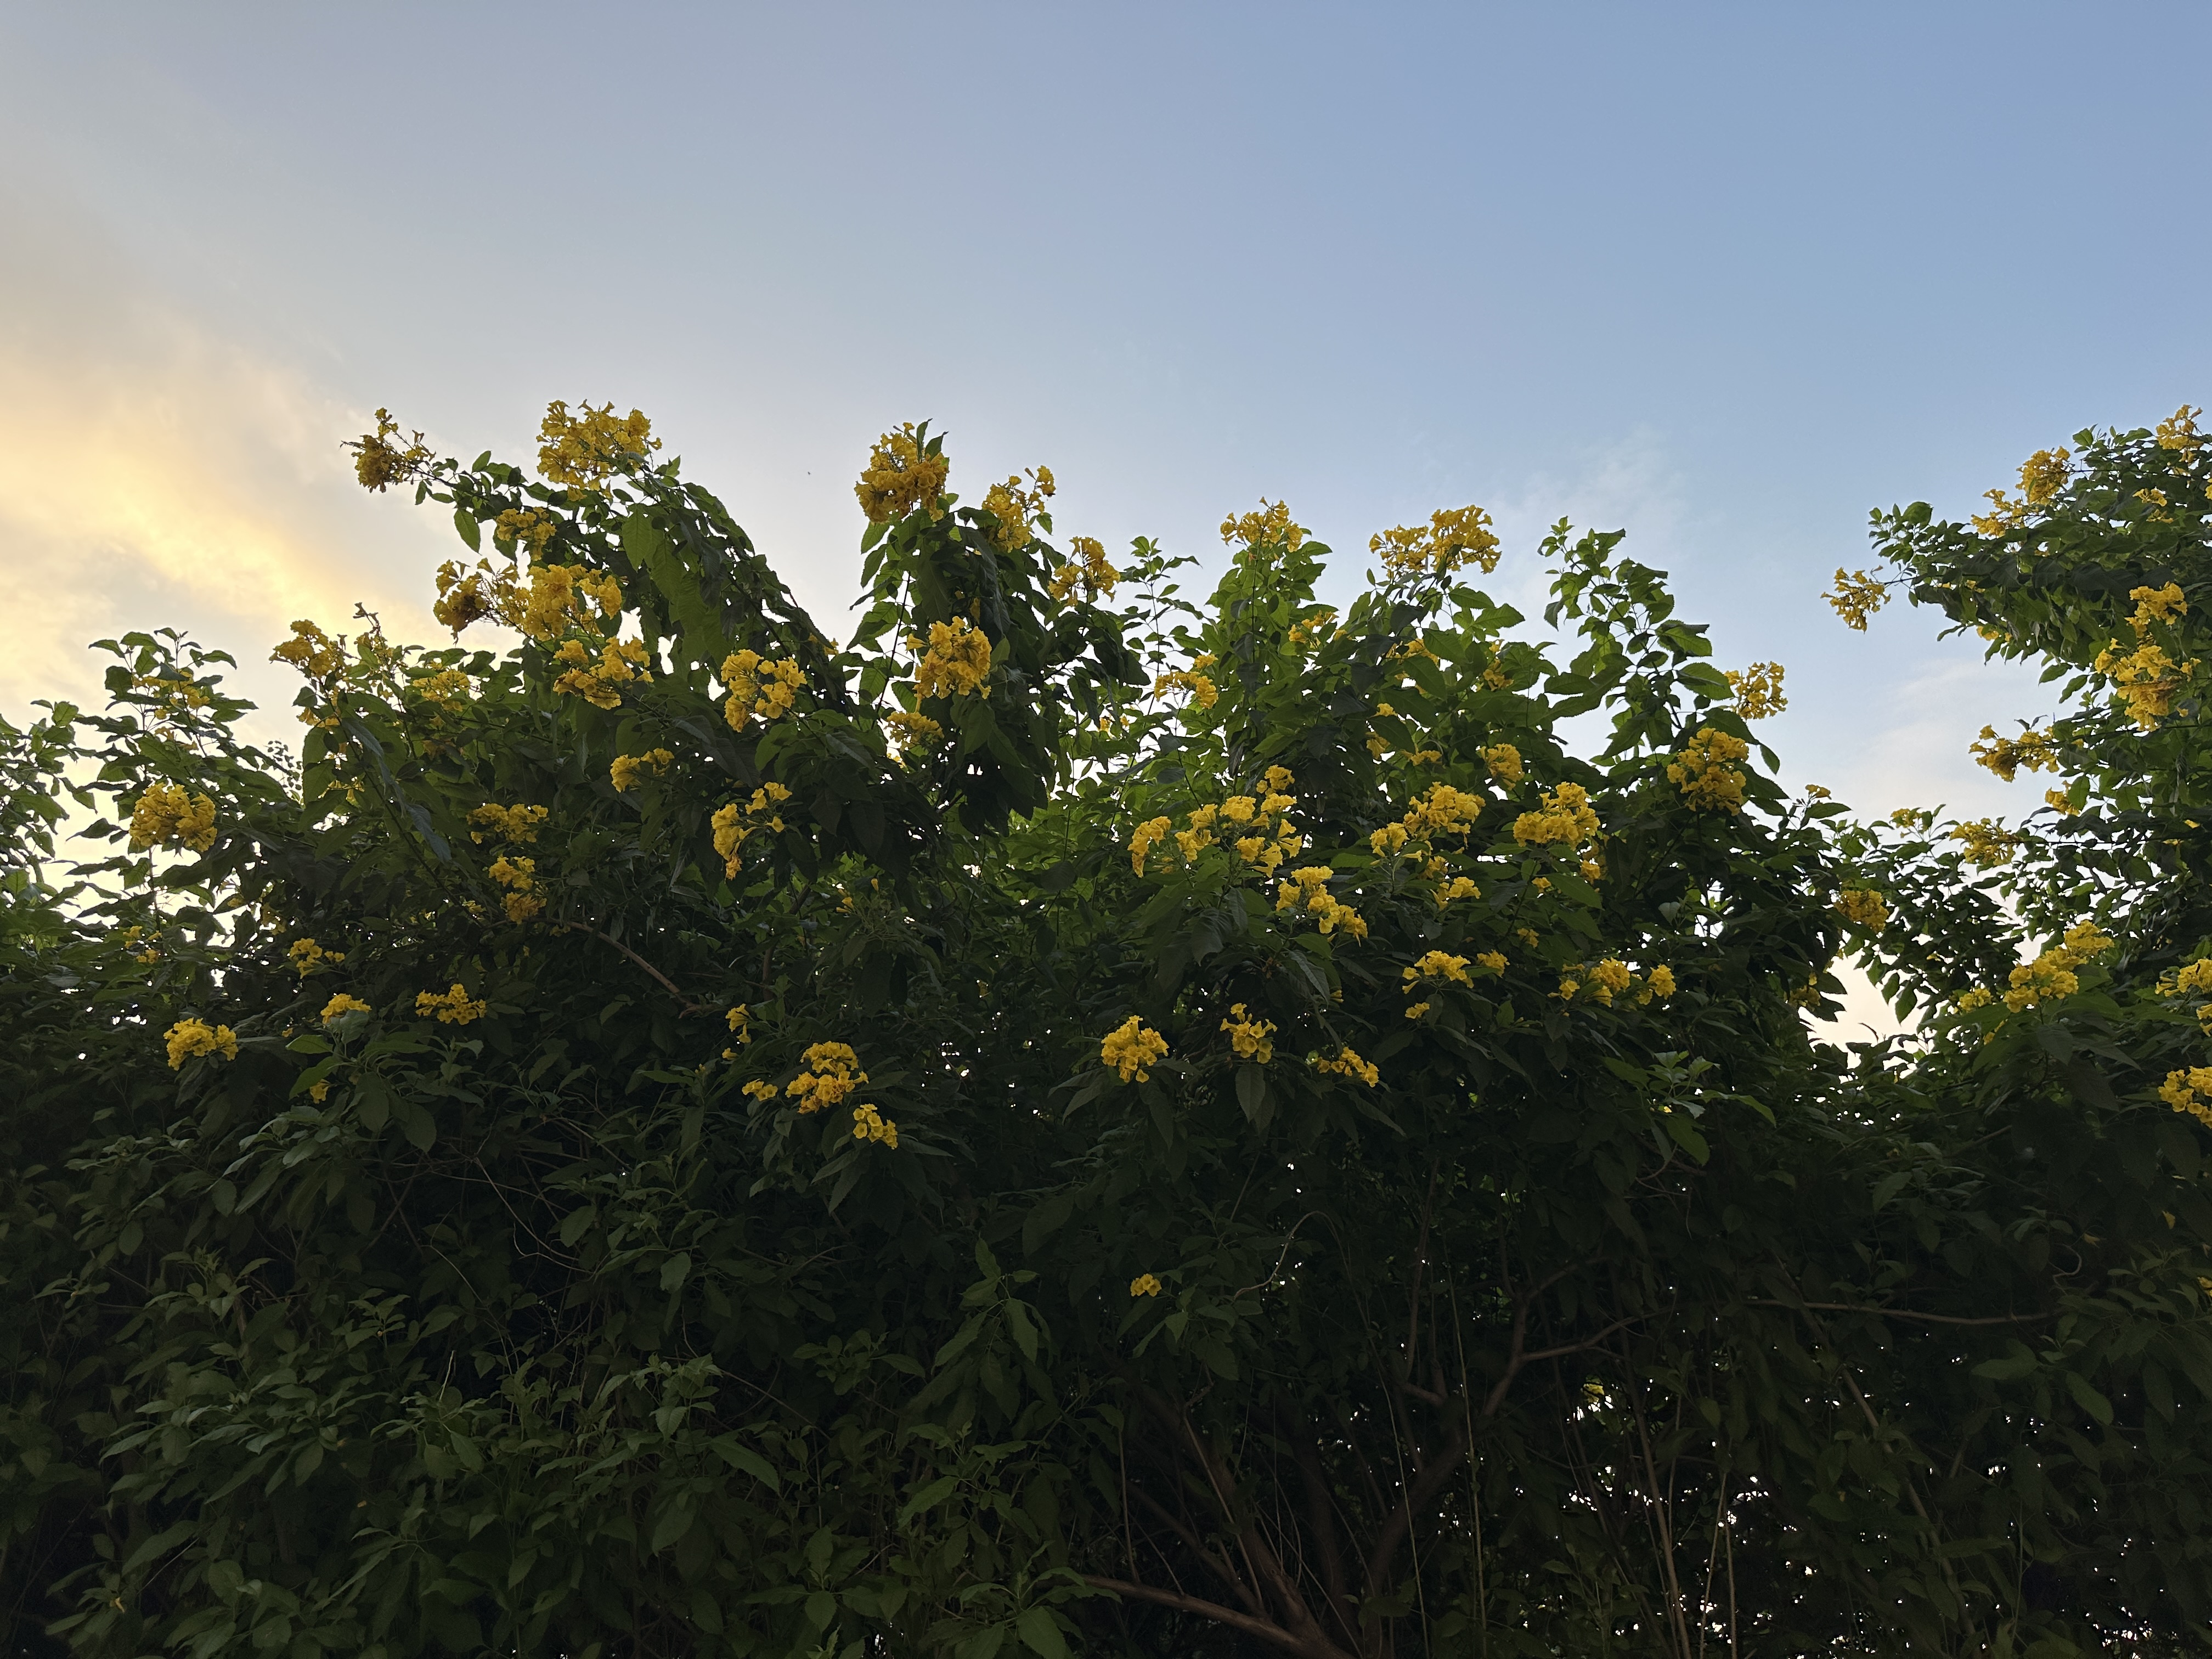 Yellow flowers in sunset.